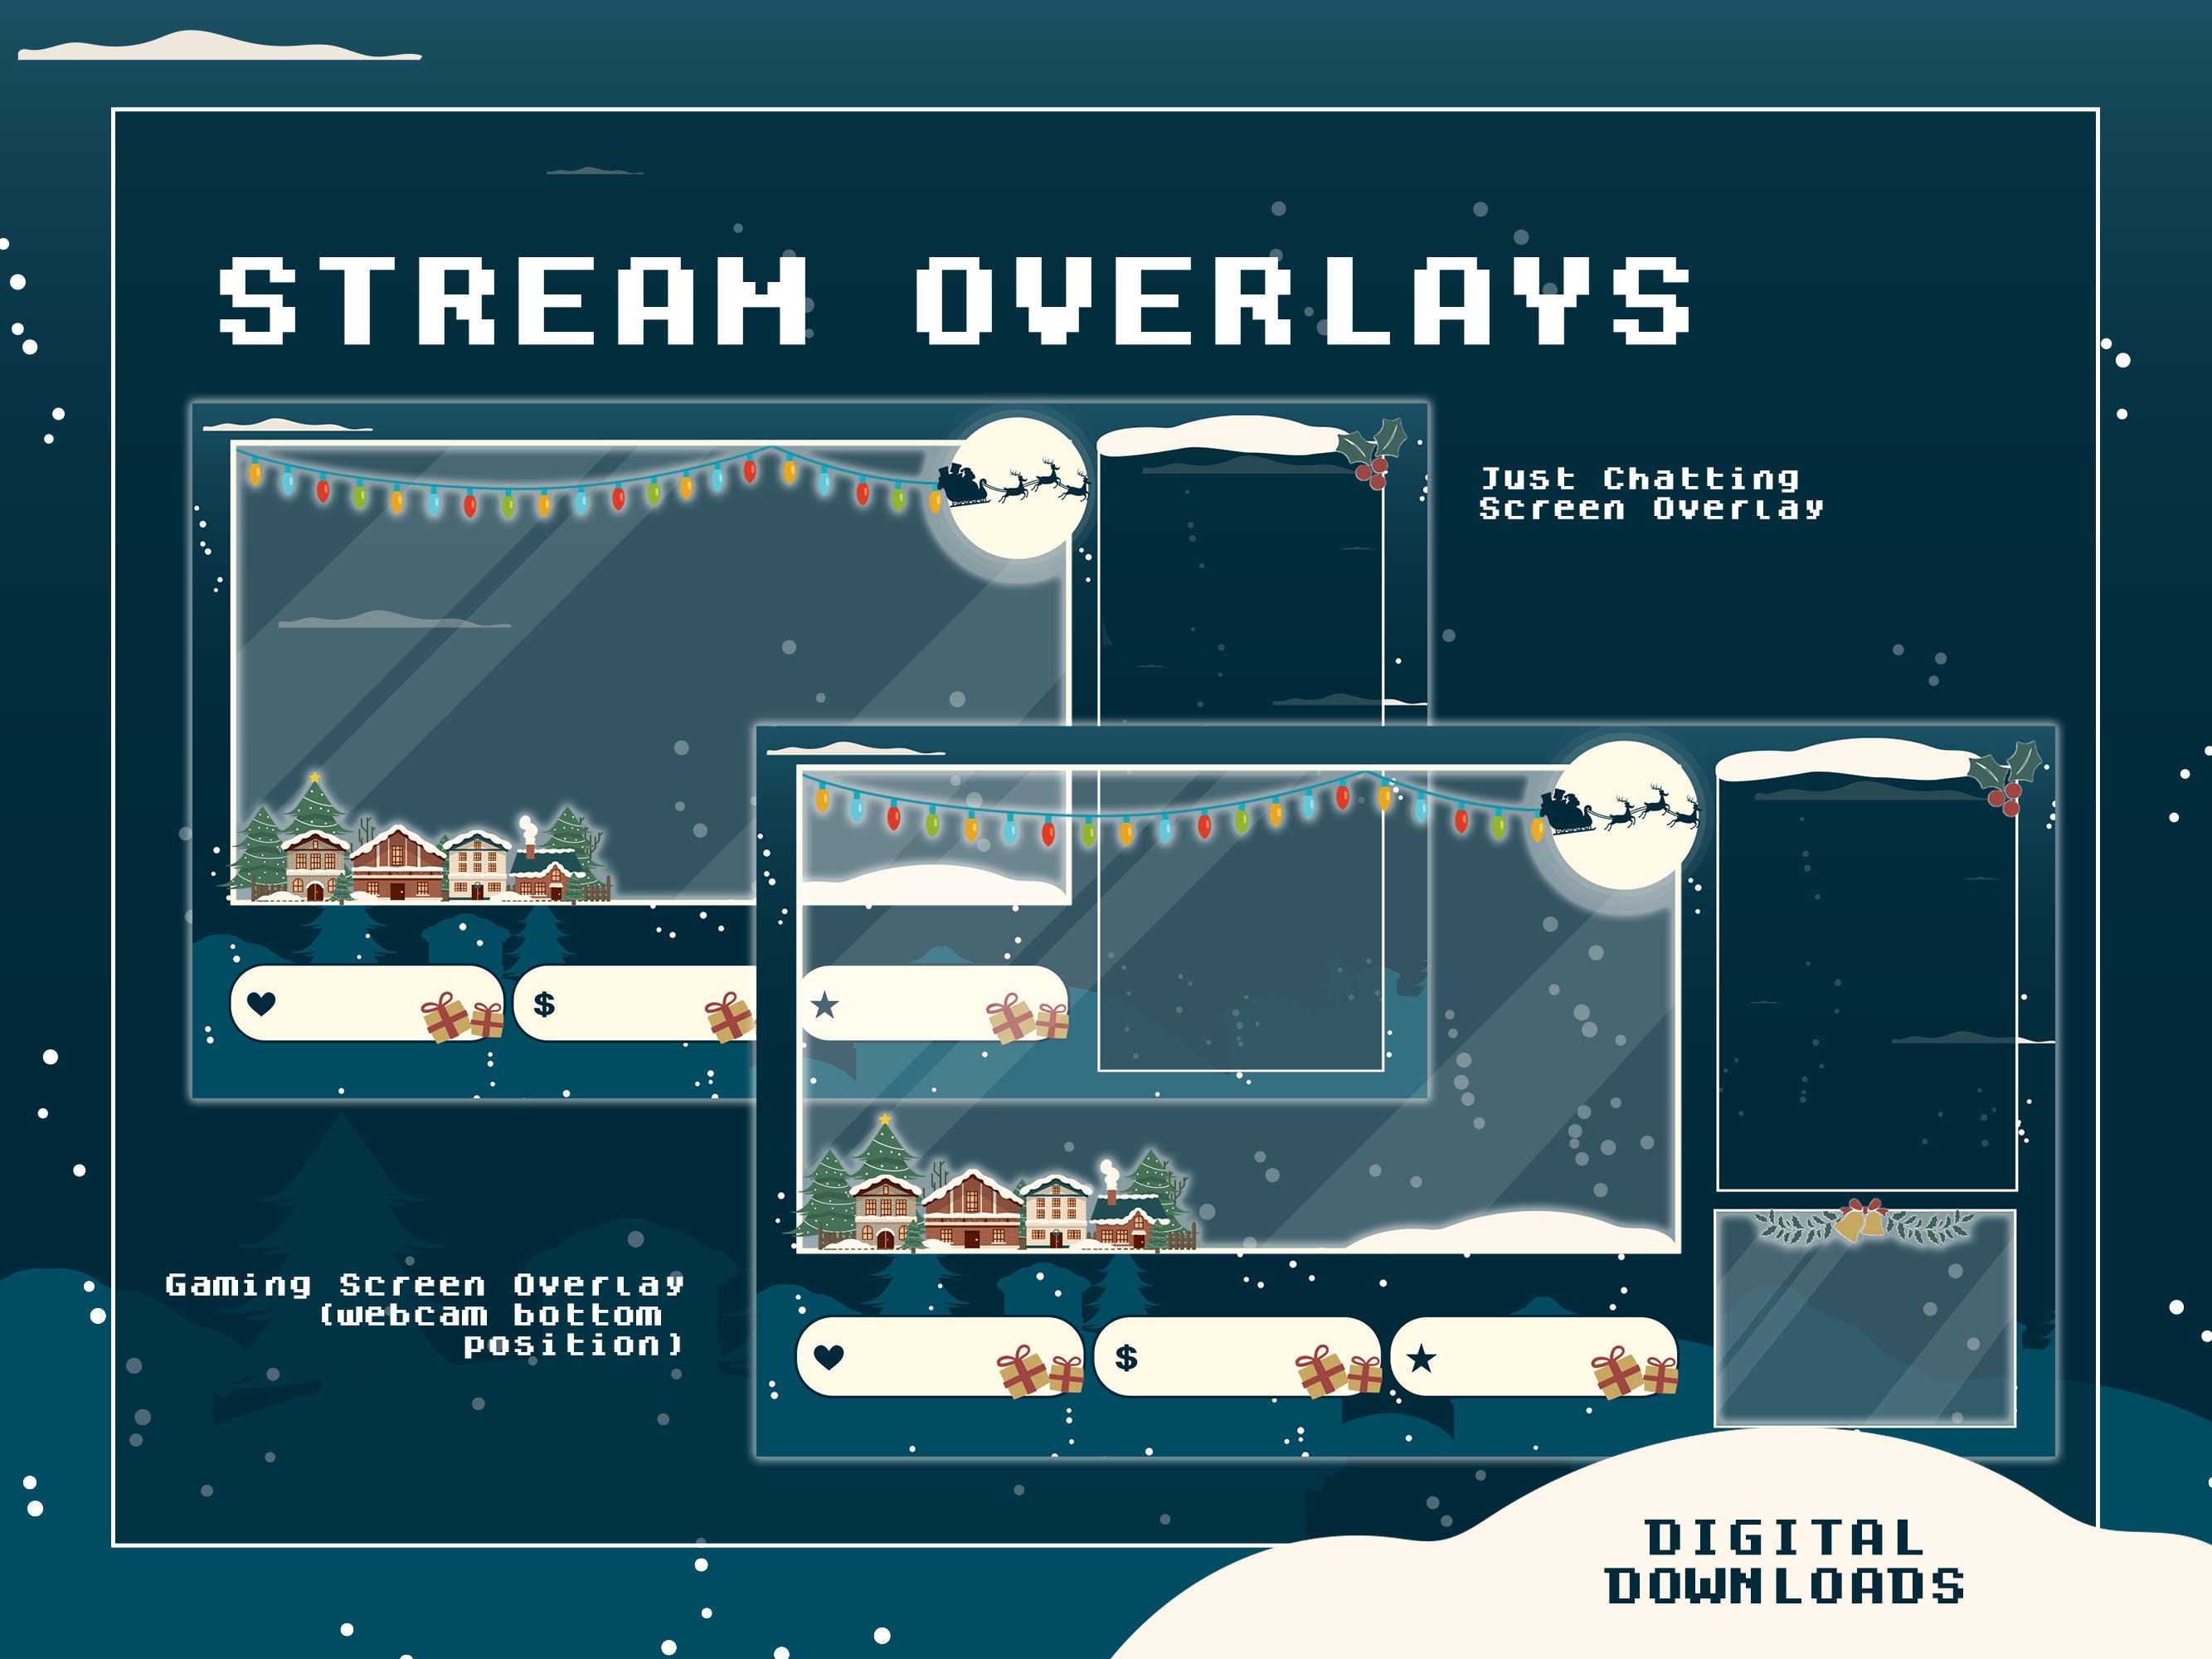 Chat Overlays for Just Chatting, ASMR, IRL on Twitch & Facebook